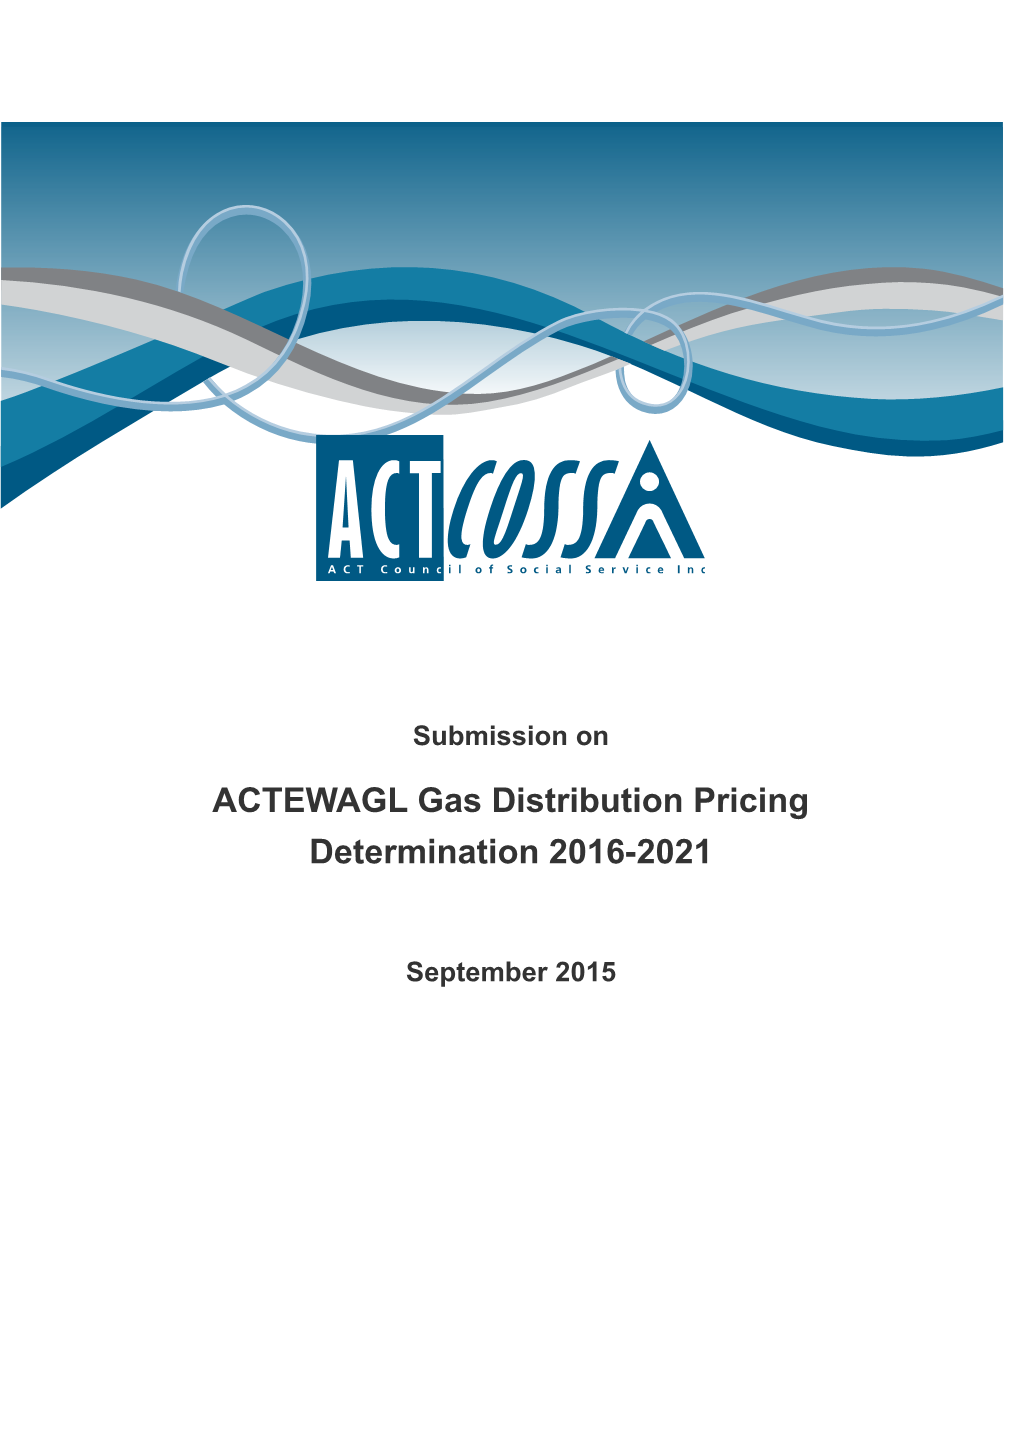 ACTEWAGL Gas Distribution Pricing Determination 2016-2021